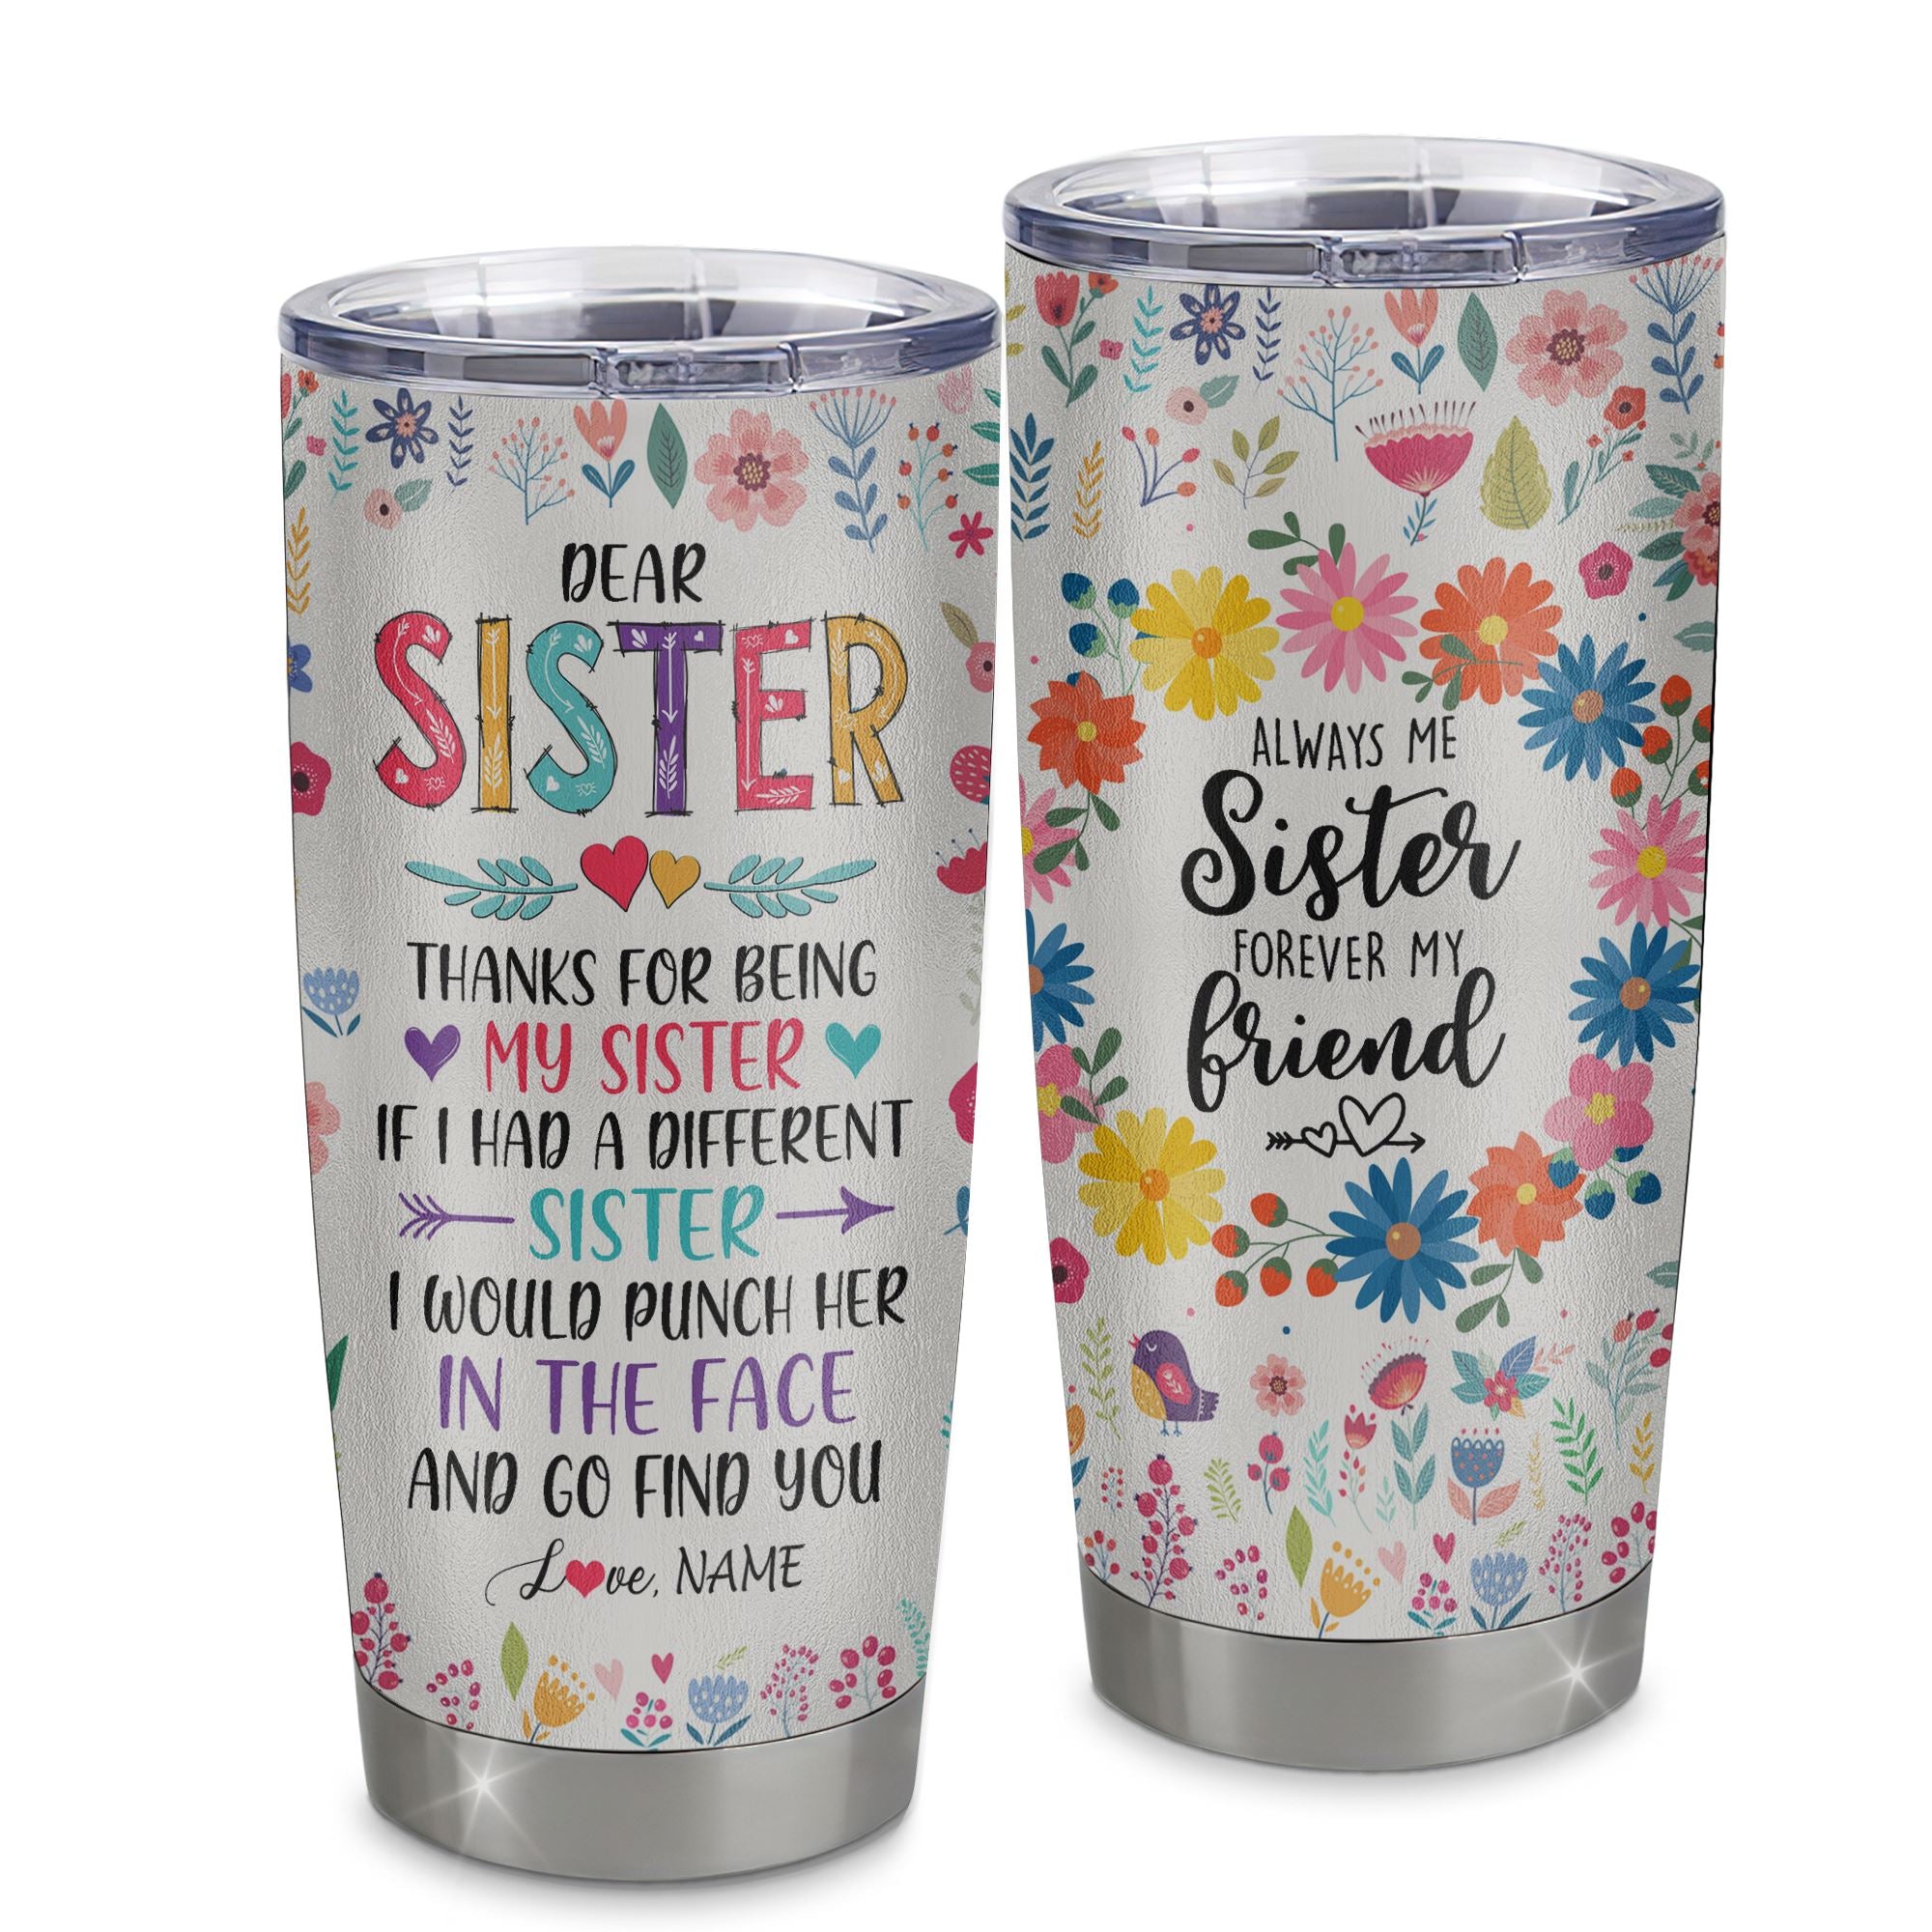 Sister Friends Glass Drinking Cups (Set of 4) – My Black Christmas